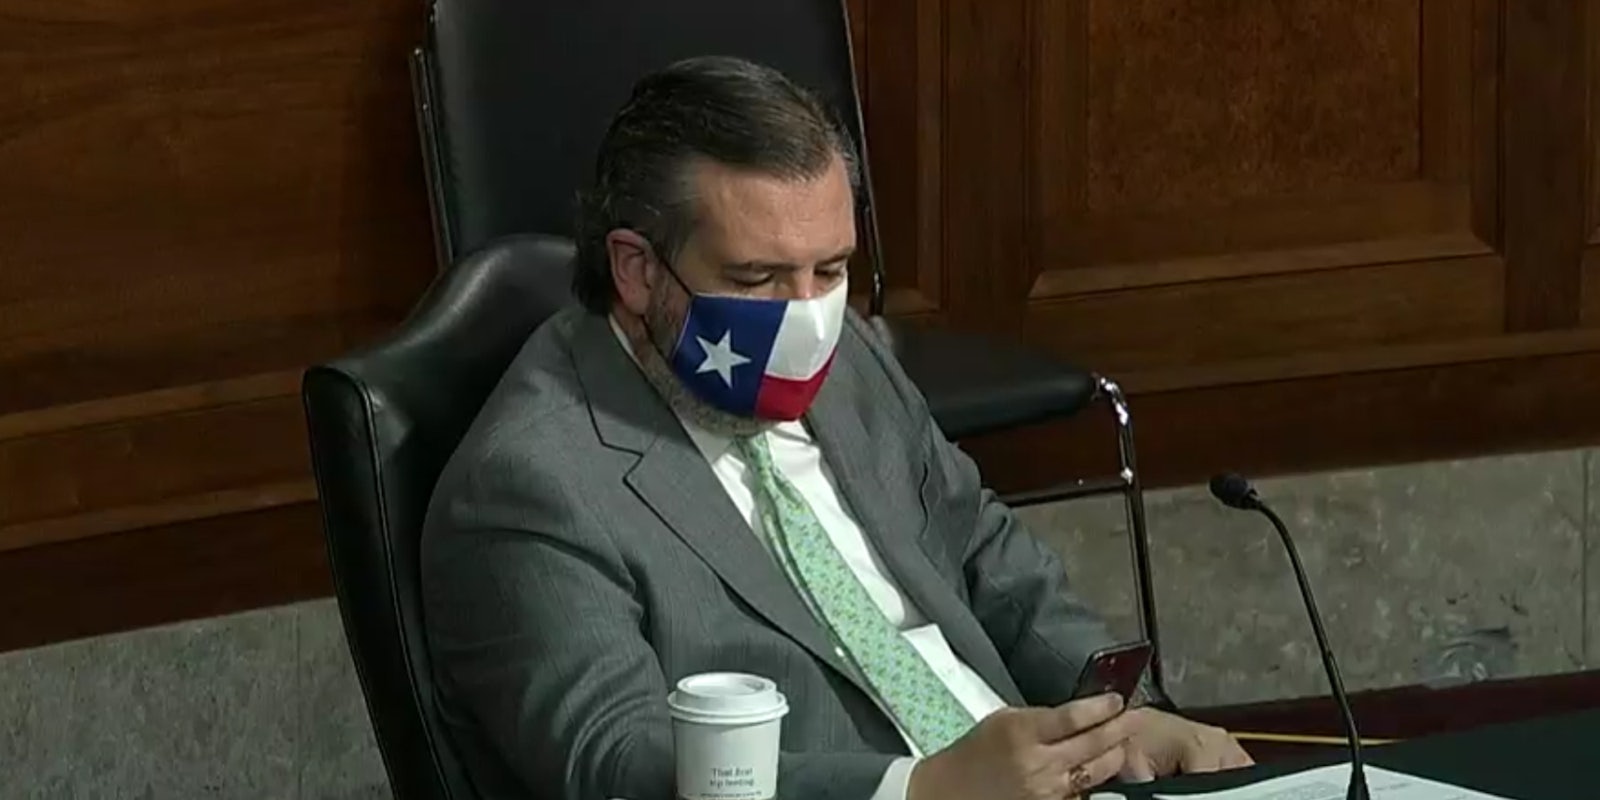 Ted Cruz appeared to be texting during a Senate hearing about security during the Capitol riot.